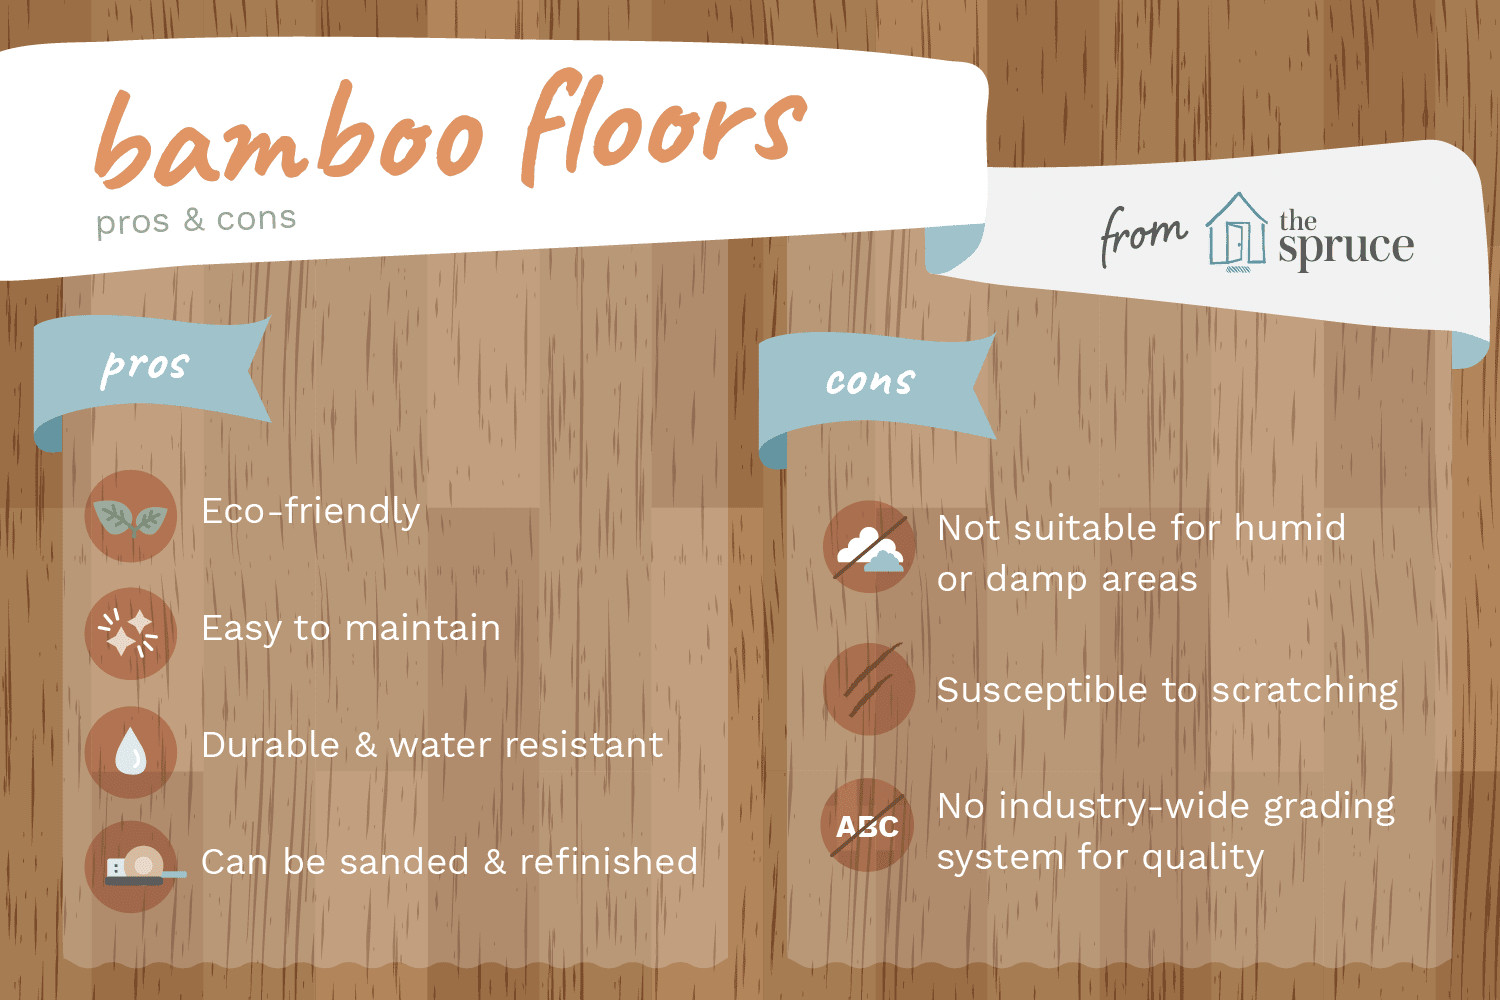 17 Great Hardwood Floor Stain Color Trends 2024 free download hardwood floor stain color trends of the advantages and disadvantages of bamboo flooring within benefits and drawbacks of bamboo floors 1314694 v3 5b102fccff1b780036c0a4fa